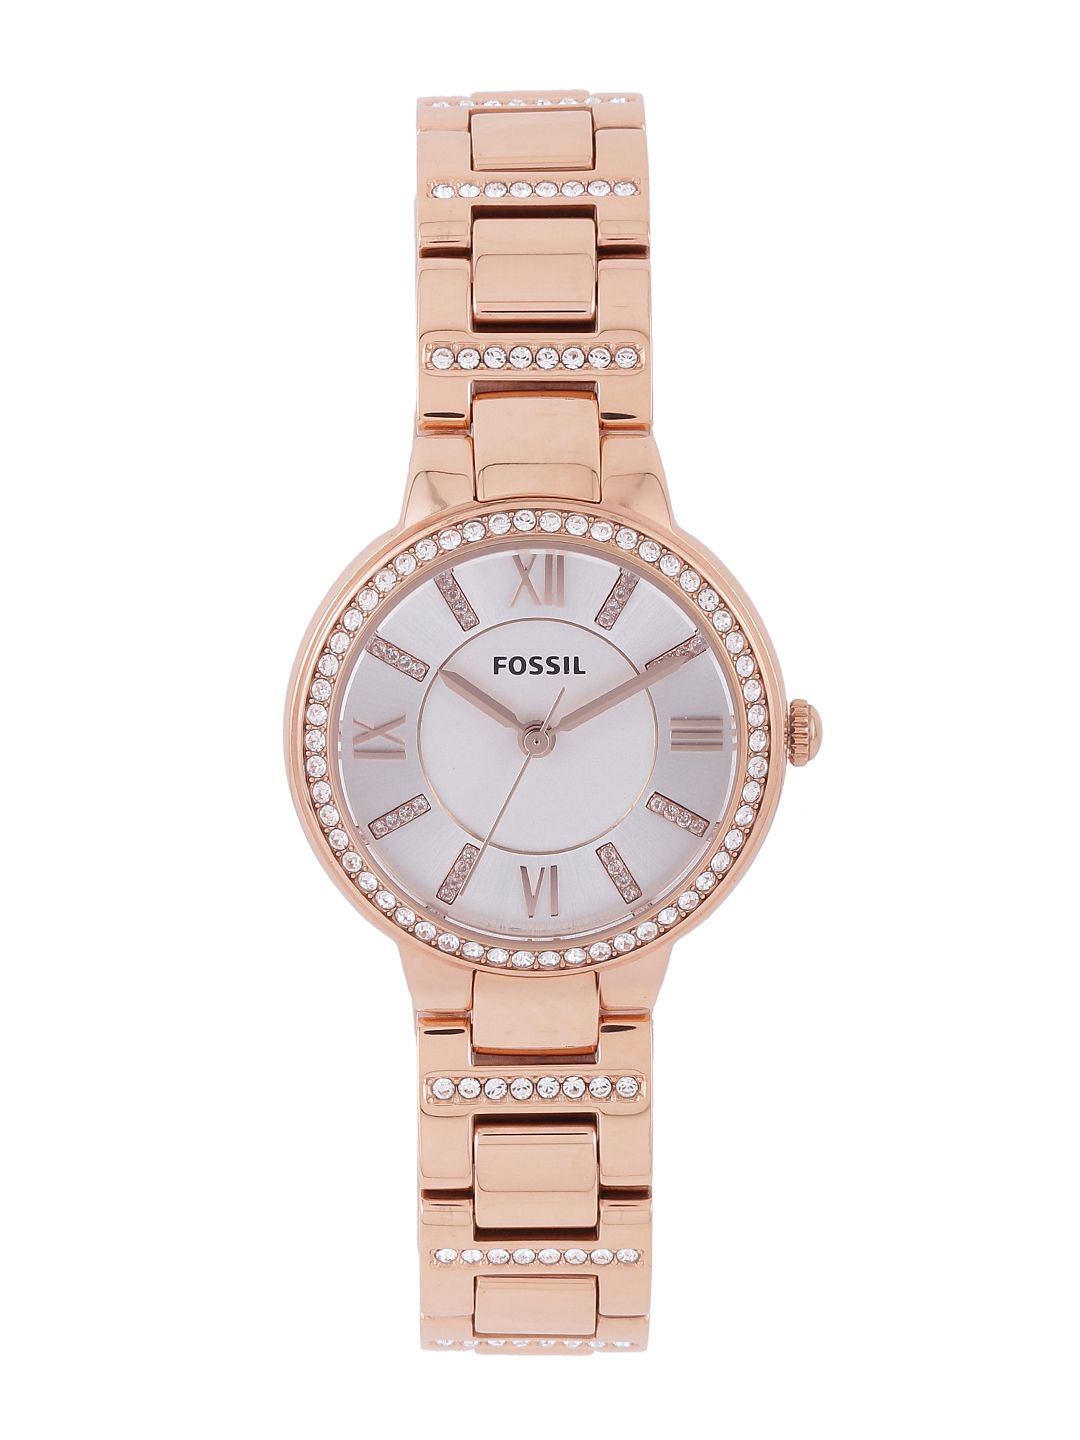 Fossil Women White & Silver-Toned Stone-Studded Dial Watch ES3284I Price in India